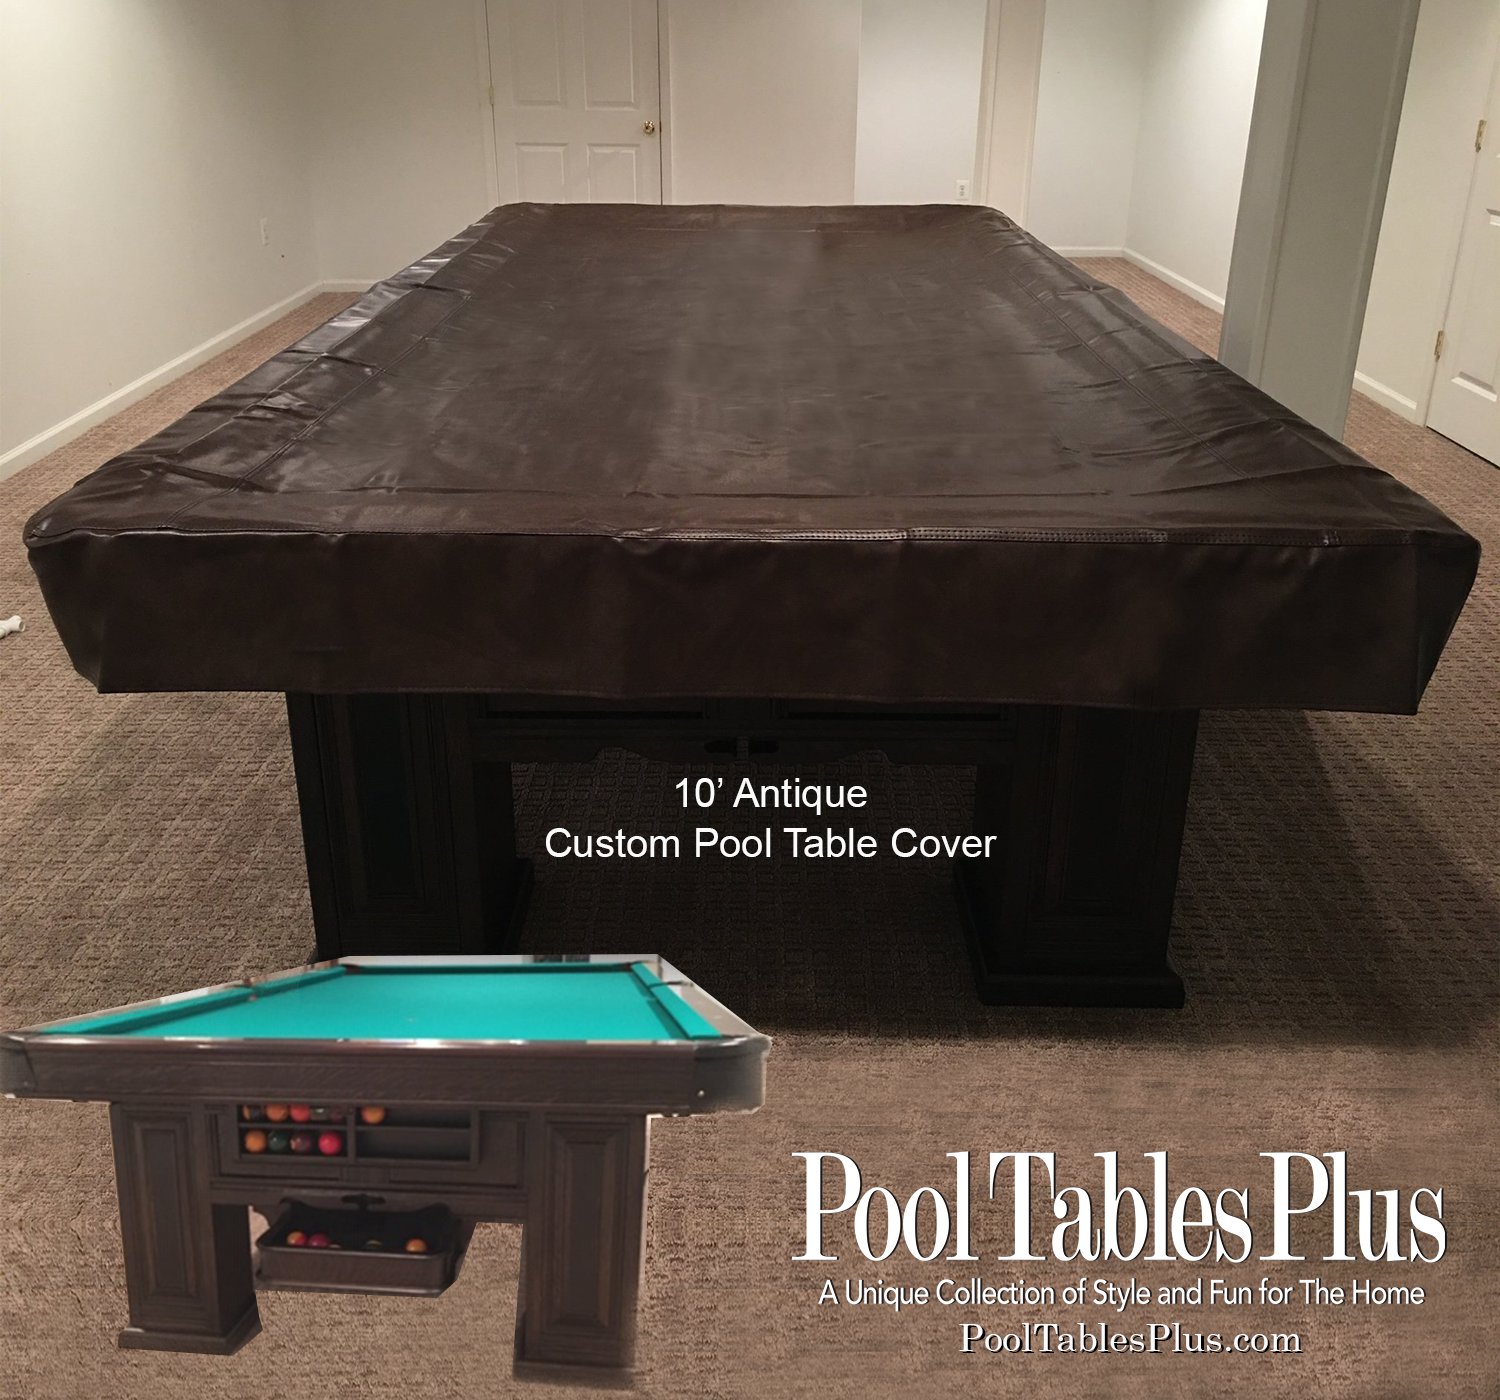 Weichster Snooker Pool Table Covers Waterproof Plastic Weighted Covers